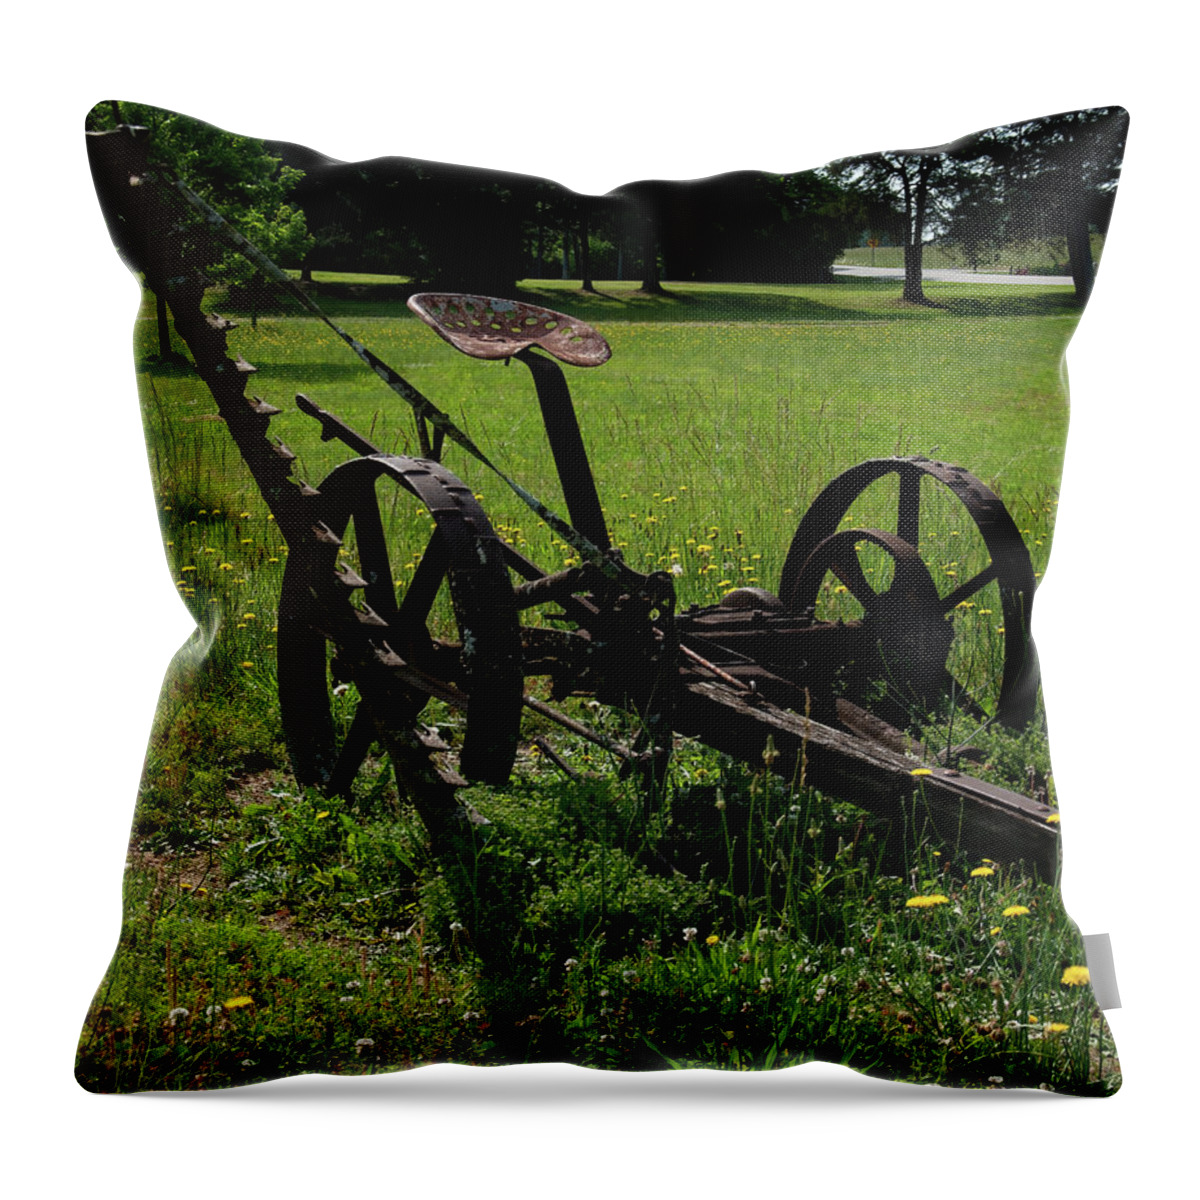 Mccormick Deering Horse Drawn Sickle Mower Throw Pillow featuring the photograph McCormick Deering horse drawn sickle mower 002 by Flees Photos